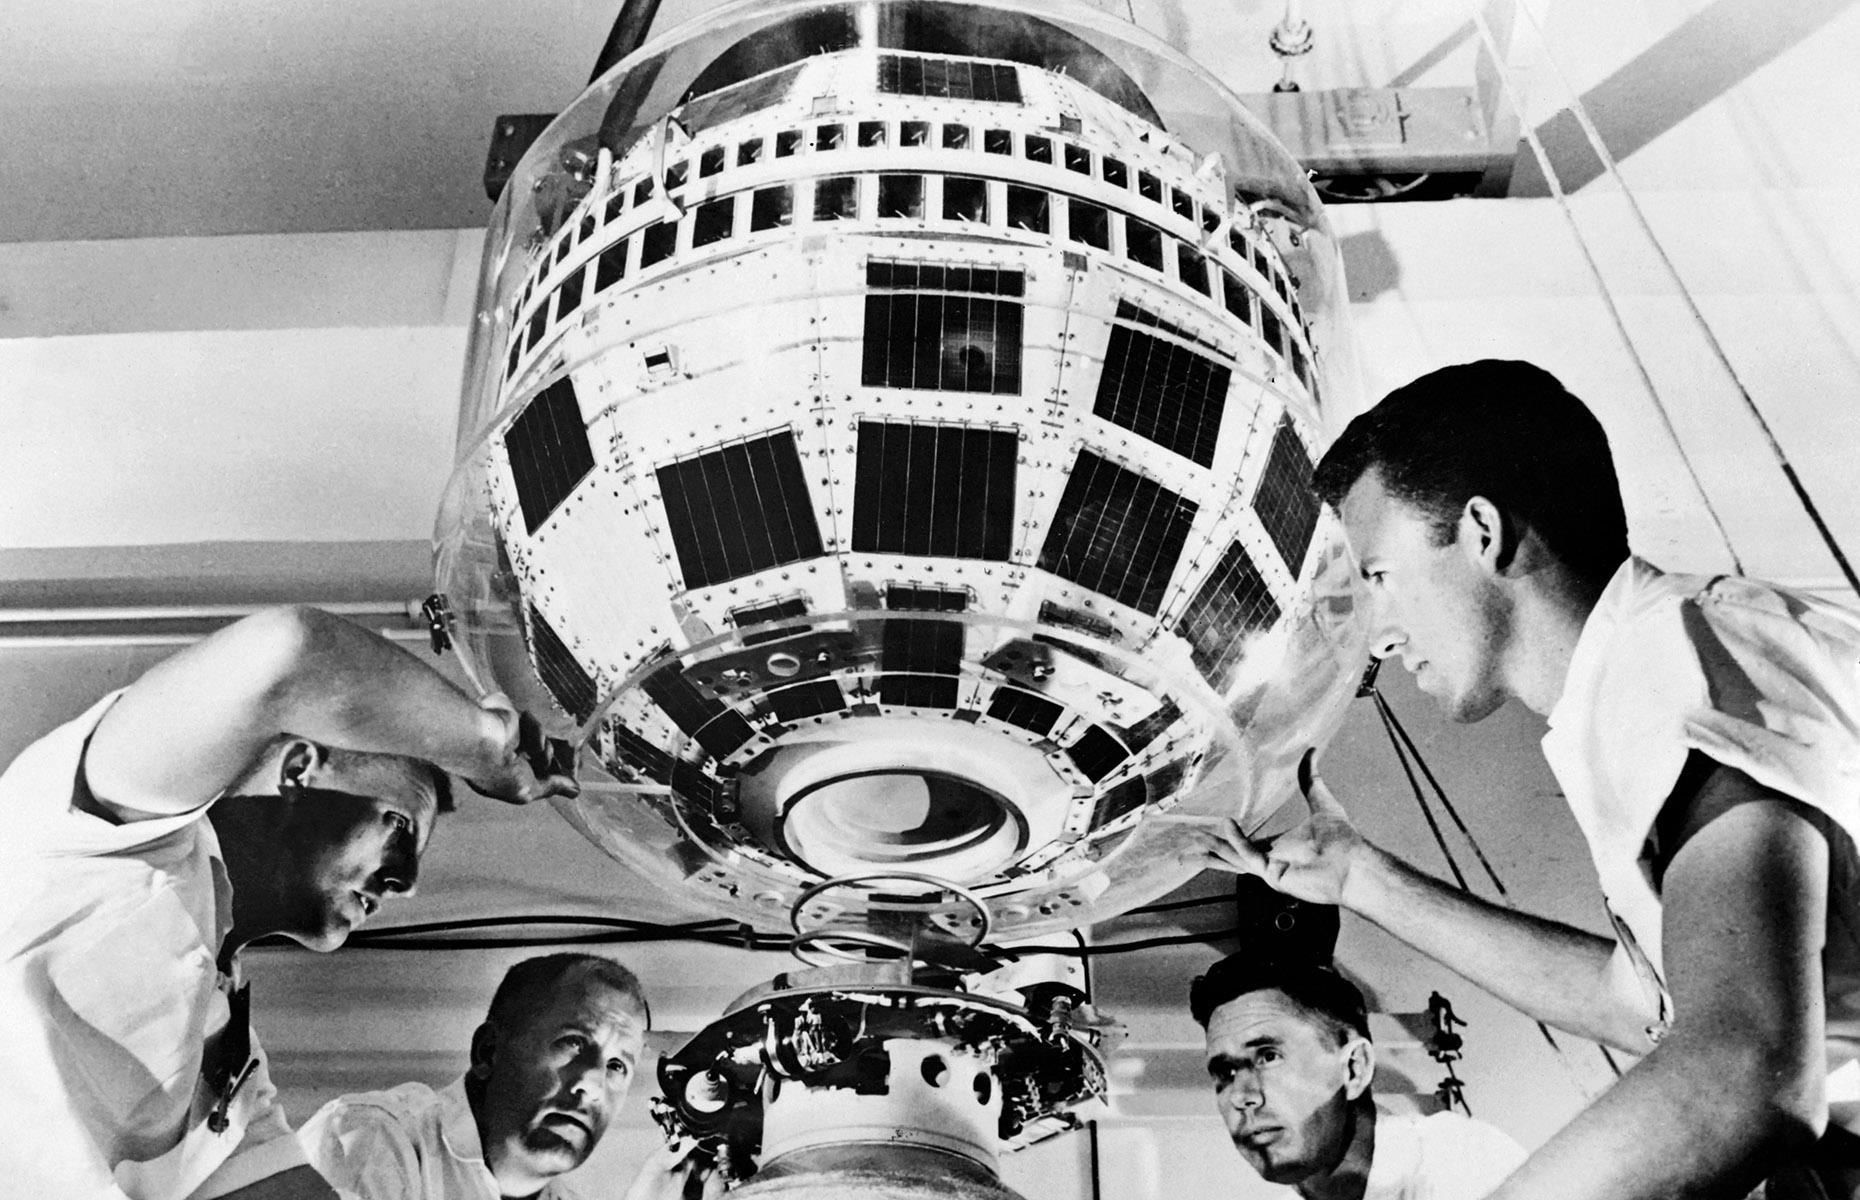 <p>The world's first communications satellite, Telstar 1 rocketed into Earth's orbit on July 10, 1962. The first privately funded satellite launch, it made history by allowing the live broadcast of television images between the United States and Europe.</p>  <p>Now out of action, the obsolete craft still revolves around our planet to this day.</p>